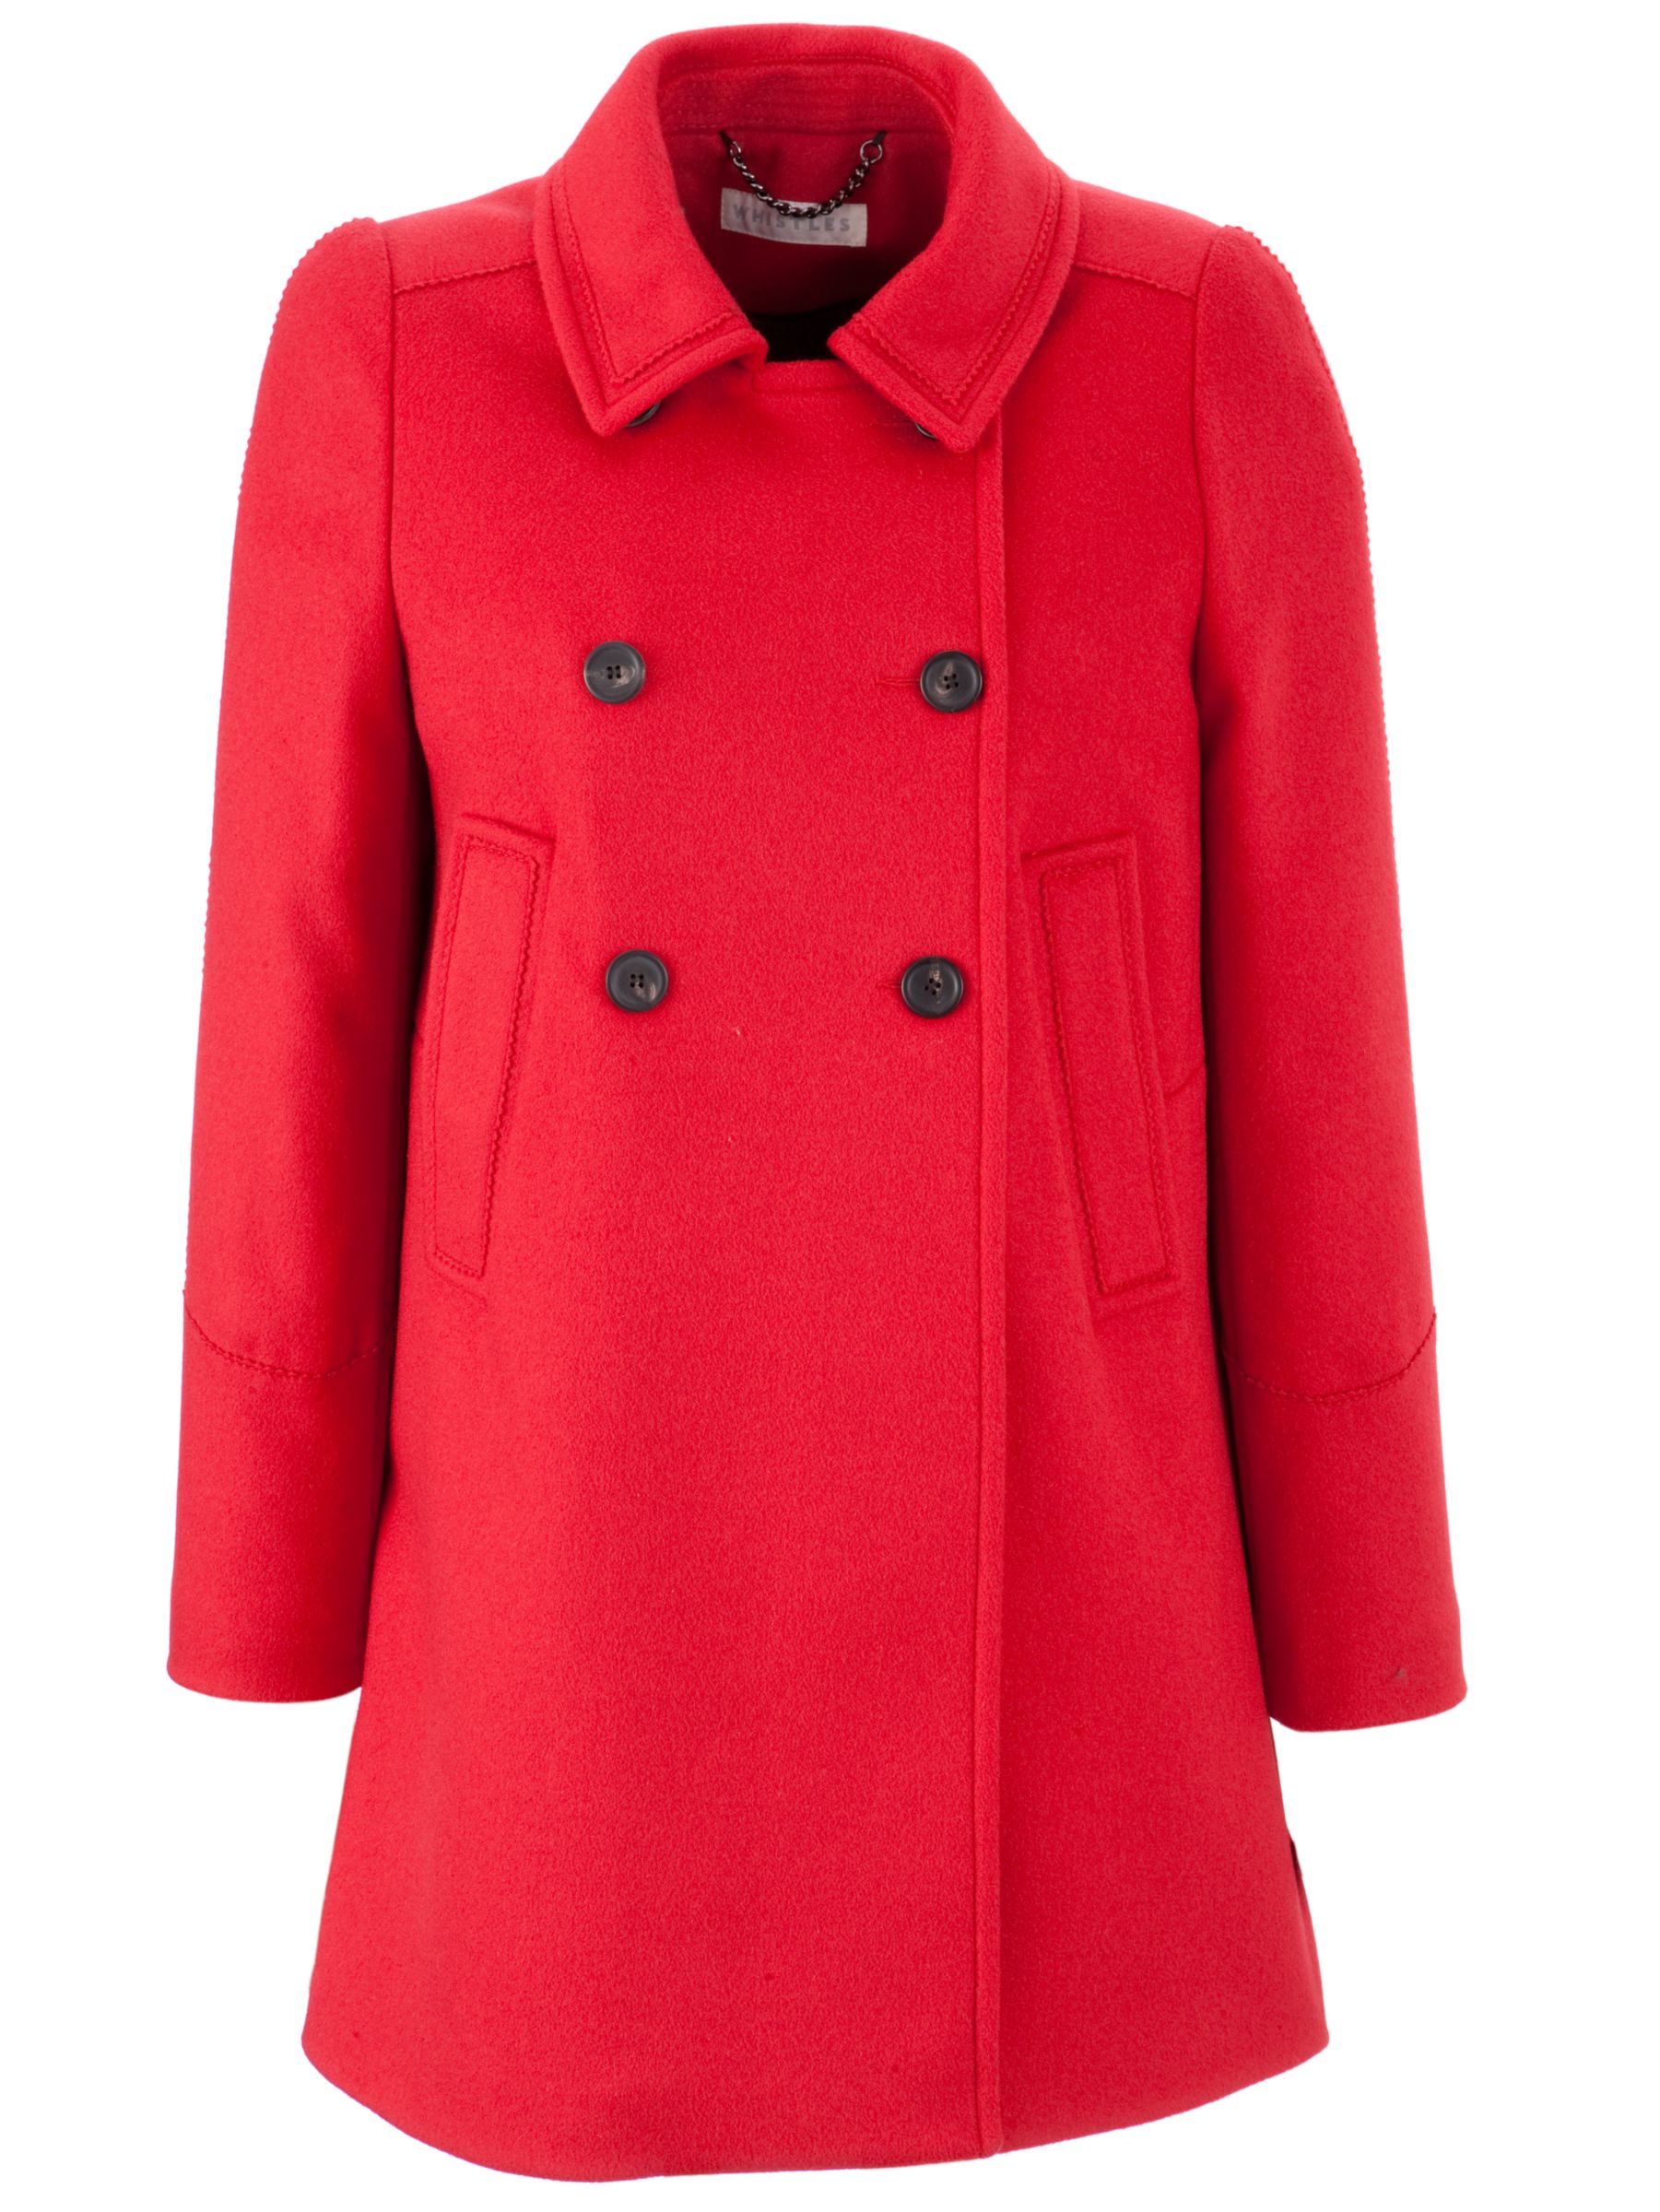 Whistles Deanne Double Breasted A-Line Coat, Red at John Lewis